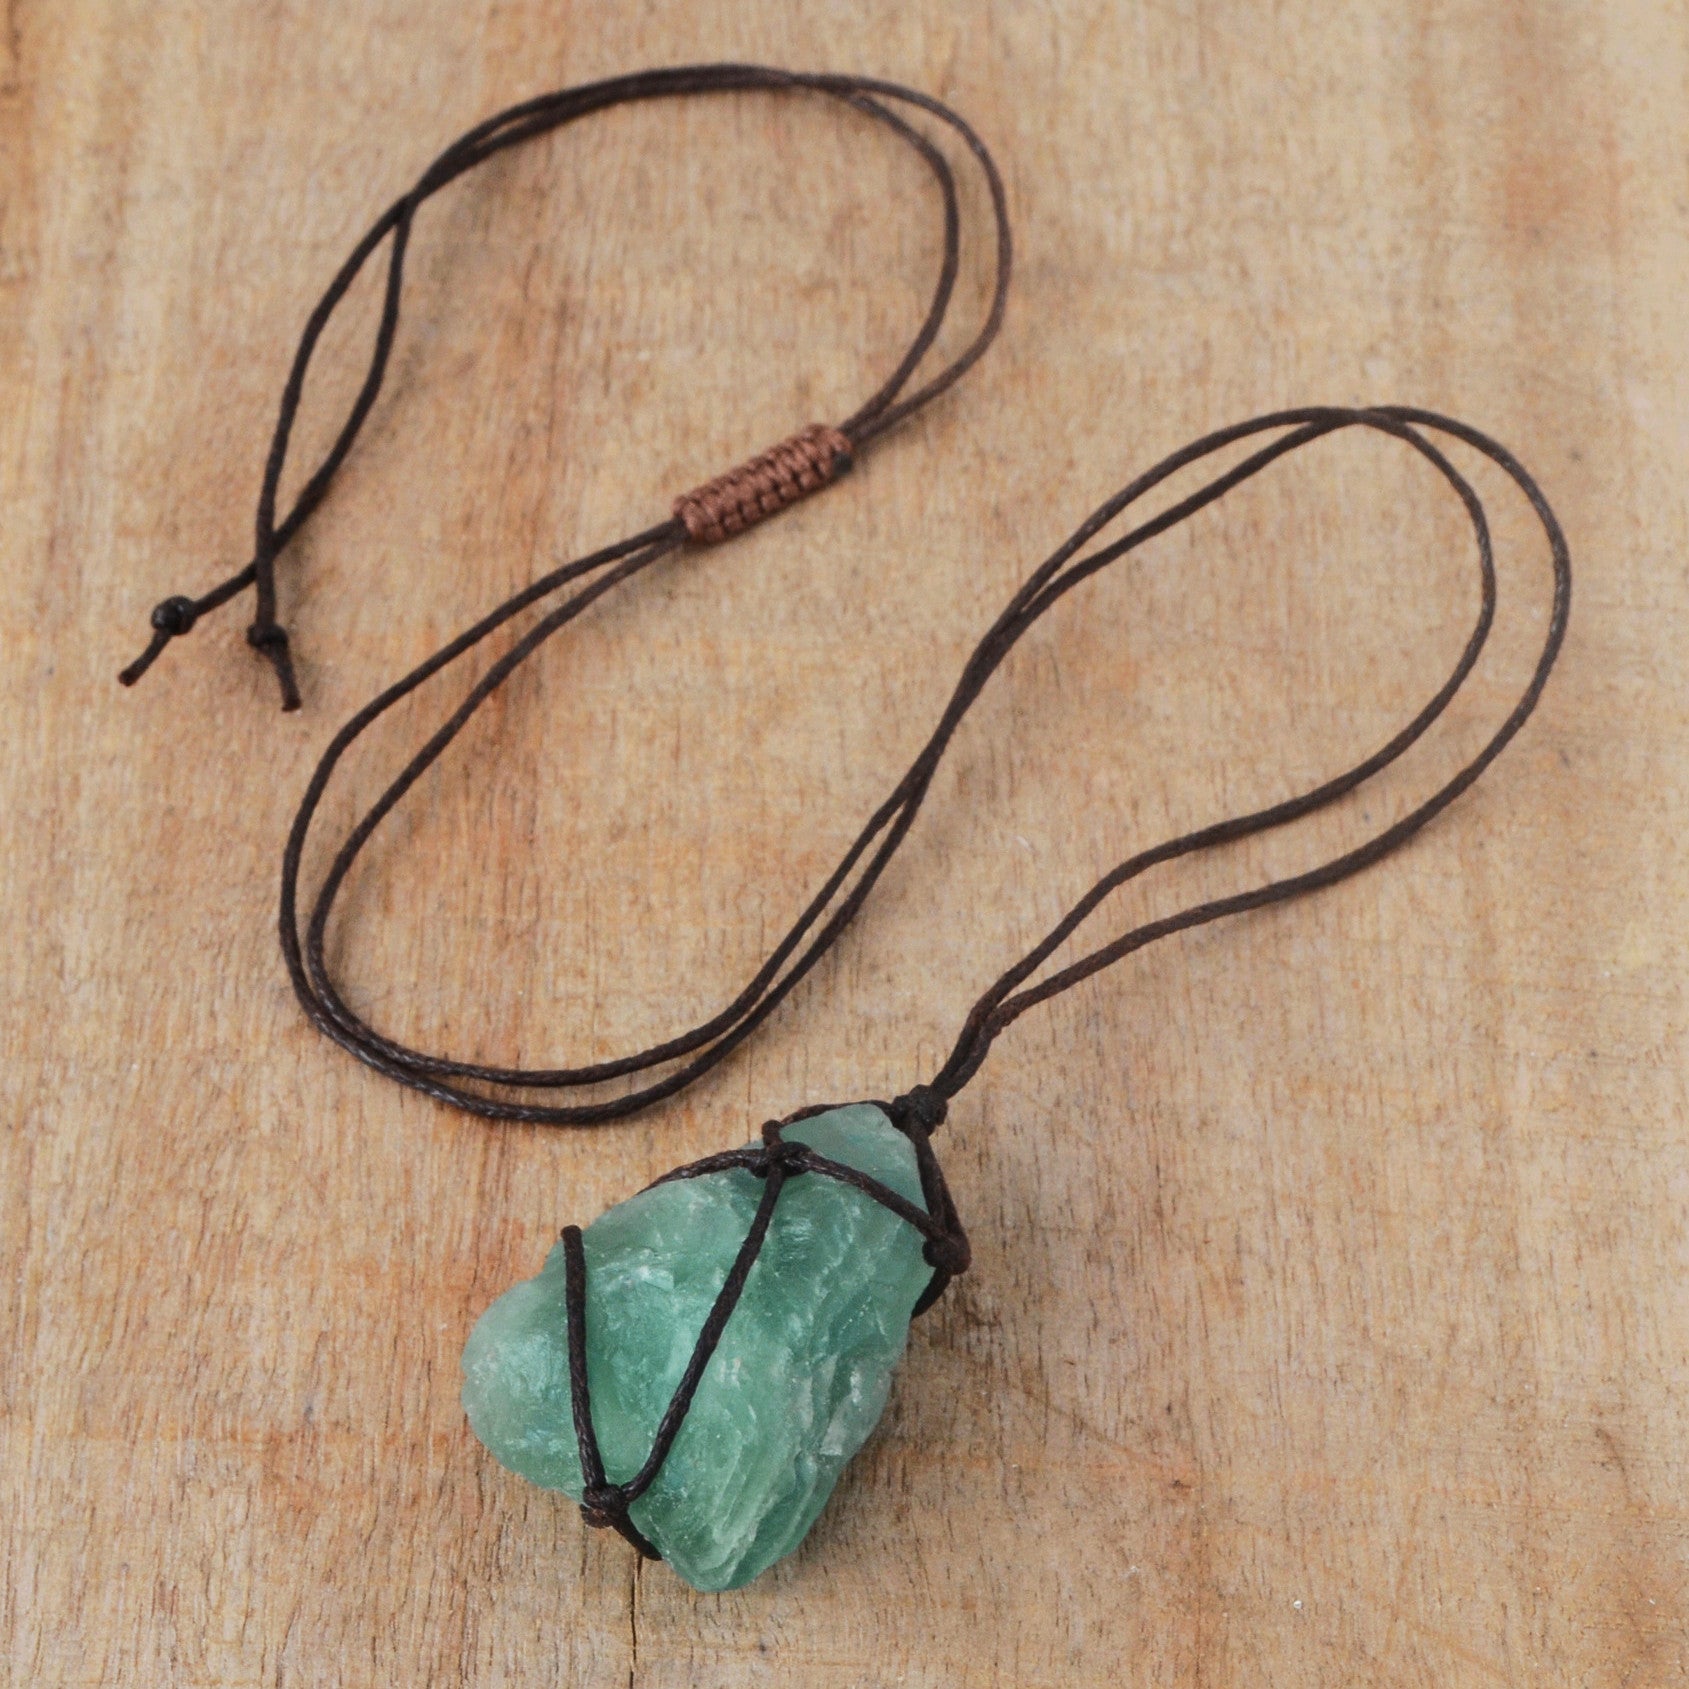 Natural Raw Fluorite Wrap Necklace, Healing Crystal Gemstone Necklace Jewelry HUS003